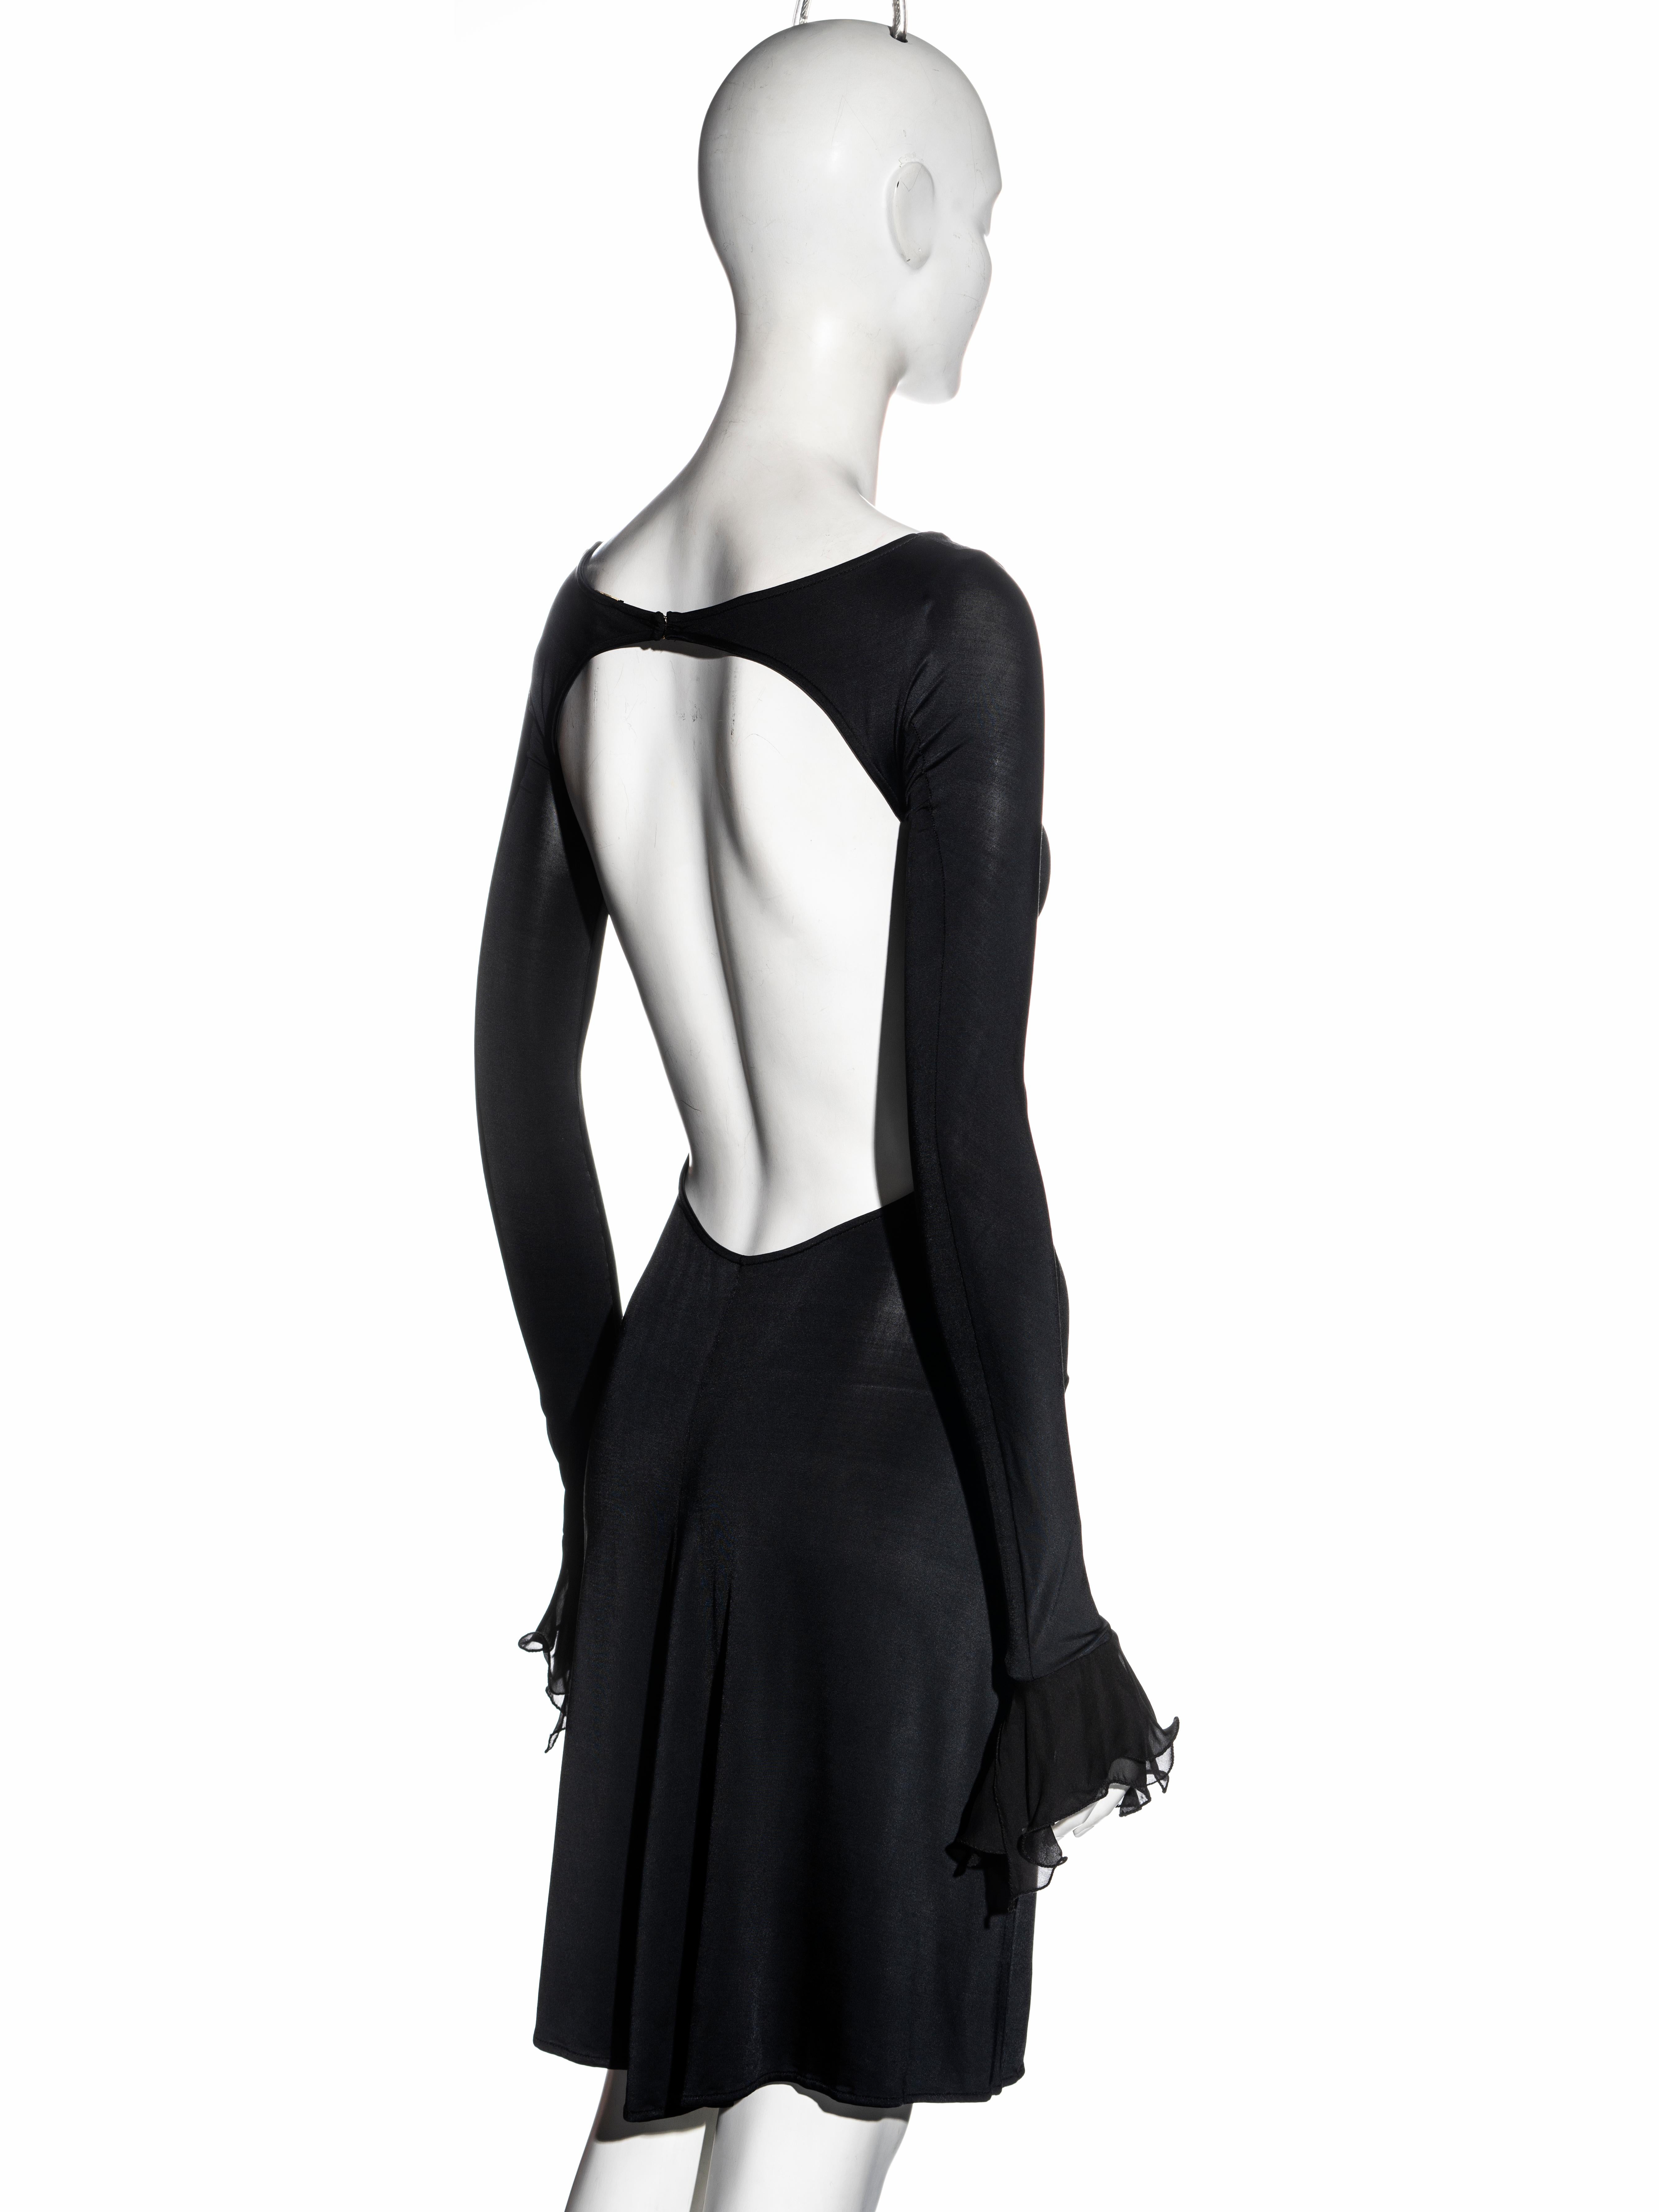 Roberto Cavalli black viscose dress with cut-outs, ss 2006 2